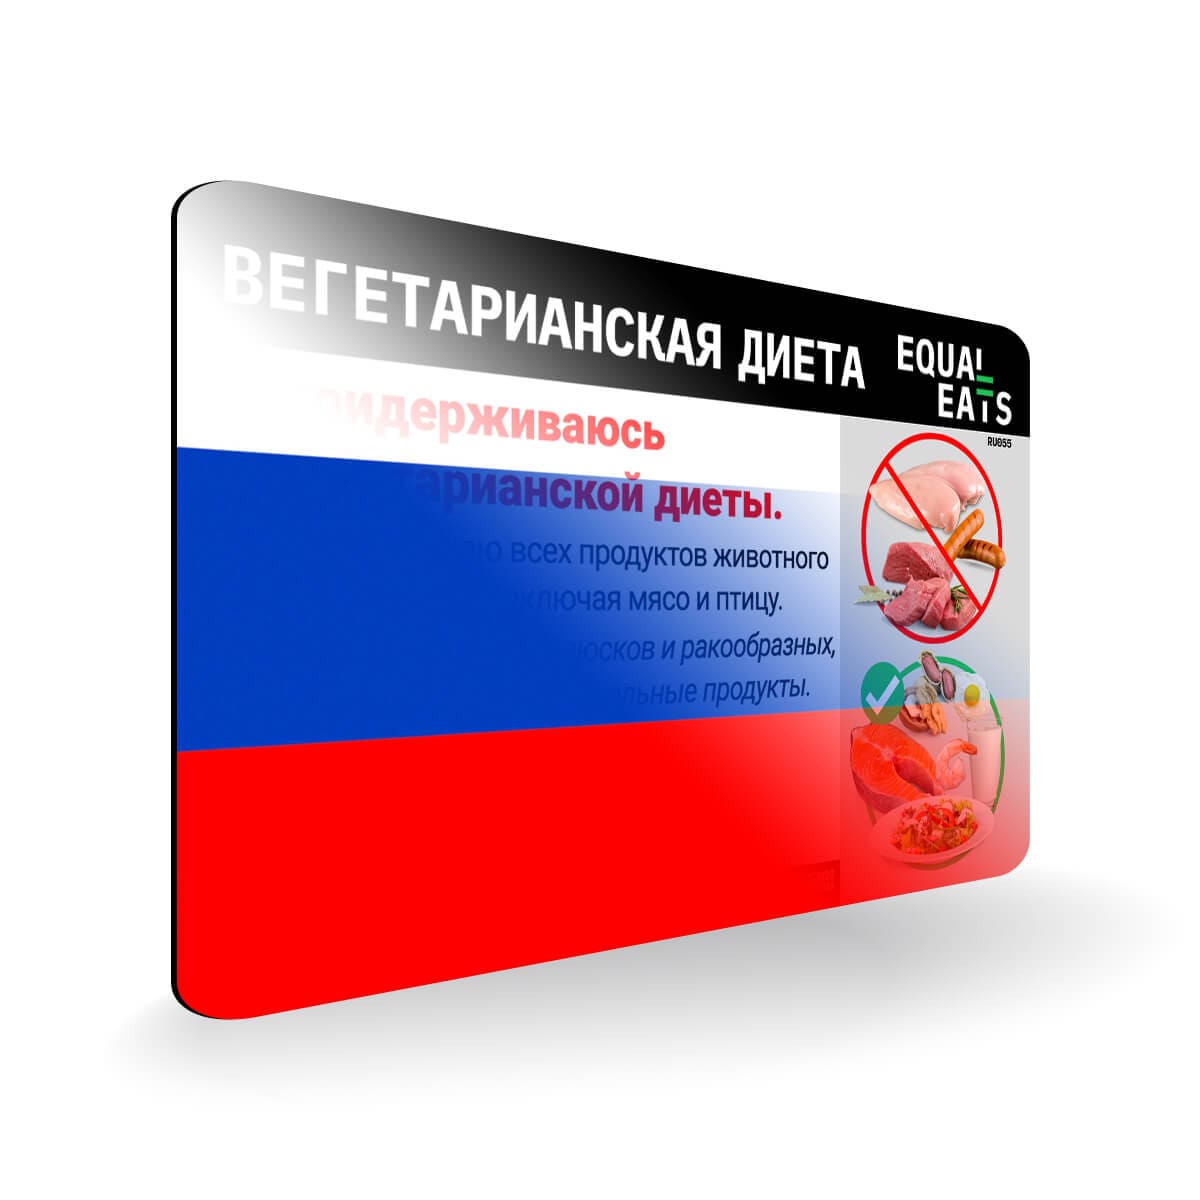 Pescatarian in Russian. Pescatarian Diet Traveling in Russia